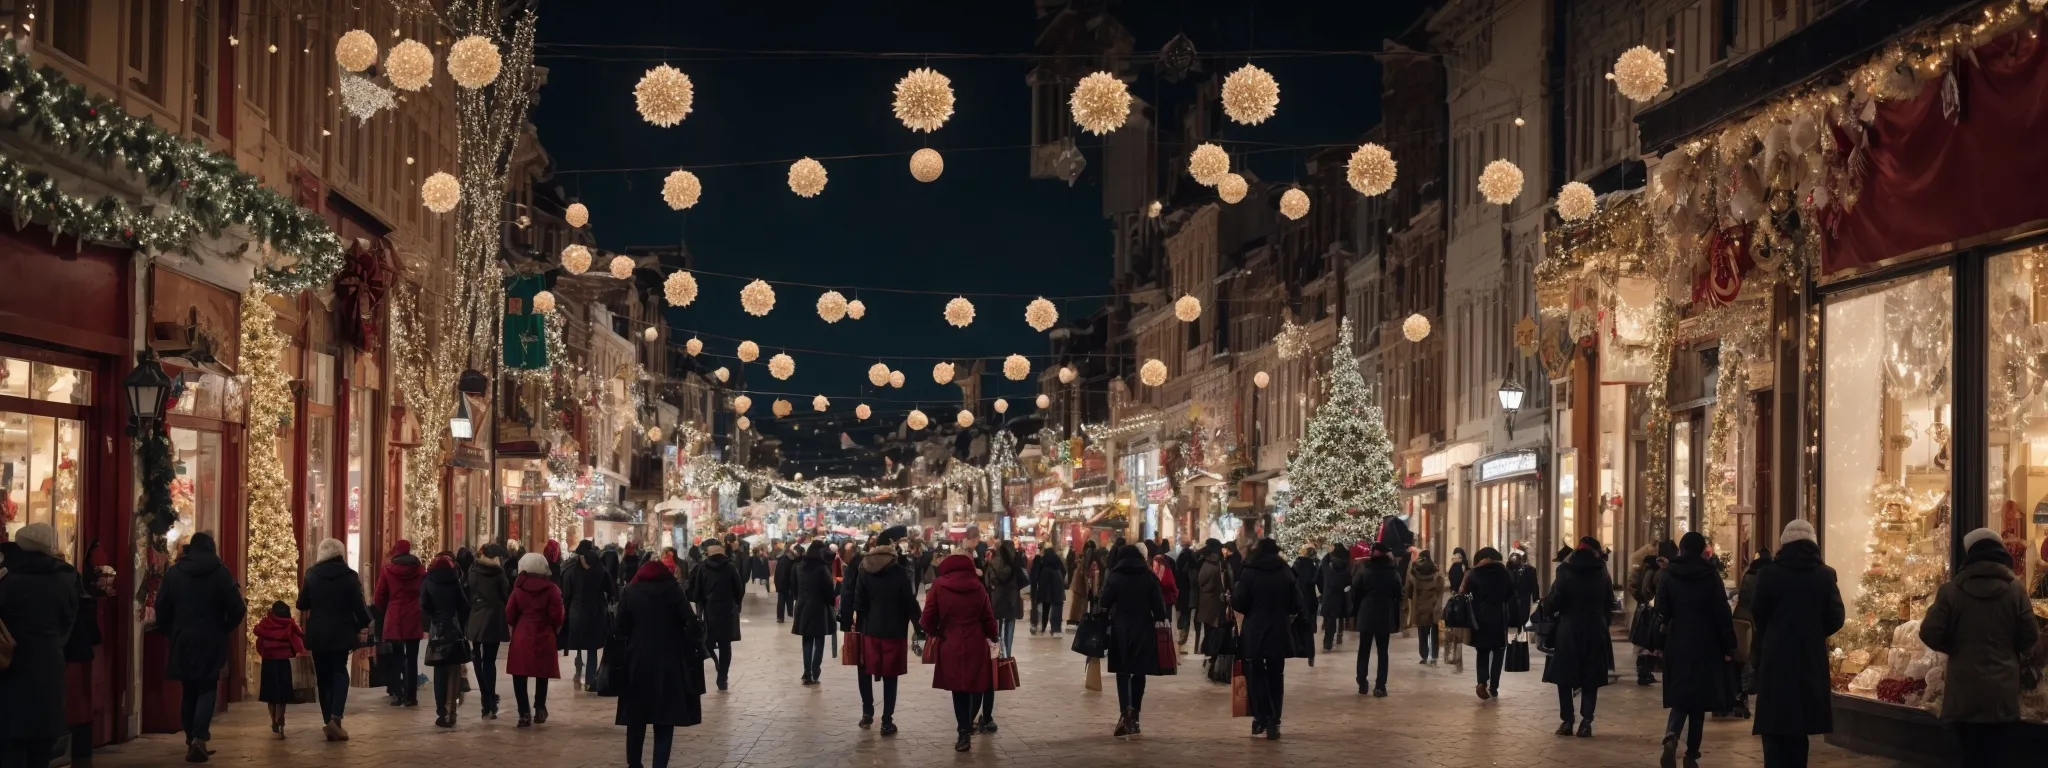 a bustling shopping district illuminated with festive lights and adorned with holiday decorations as shoppers pass by eye-catching storefront displays.